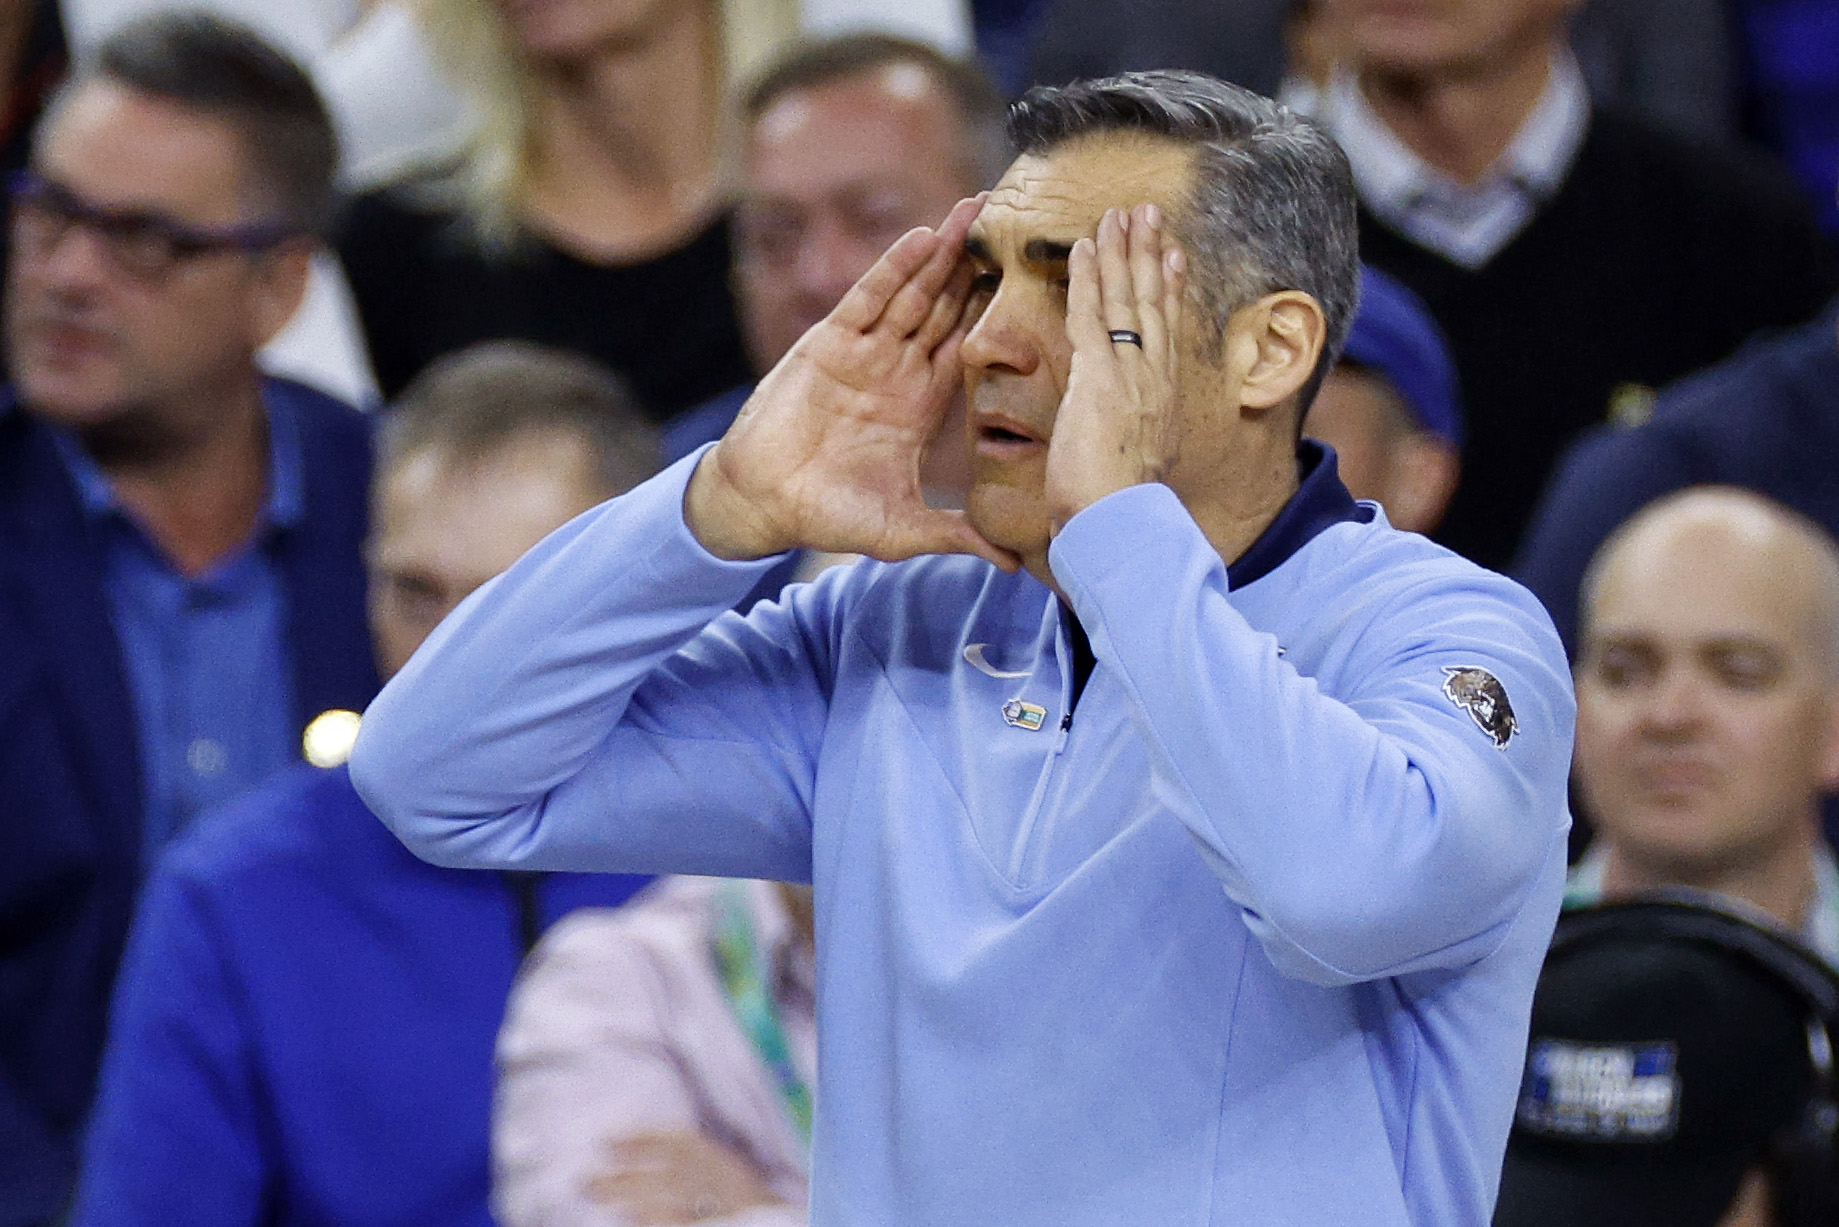 Head coach Jay Wright of the Villanova Wildcats reacts in the second half of the game against the Kansas Jayhawks during the 2022 NCAA Men’s Basketball Tournament Final Four semifinal at Caesars Superdome on April 02, 2022 in New Orleans, Louisiana.